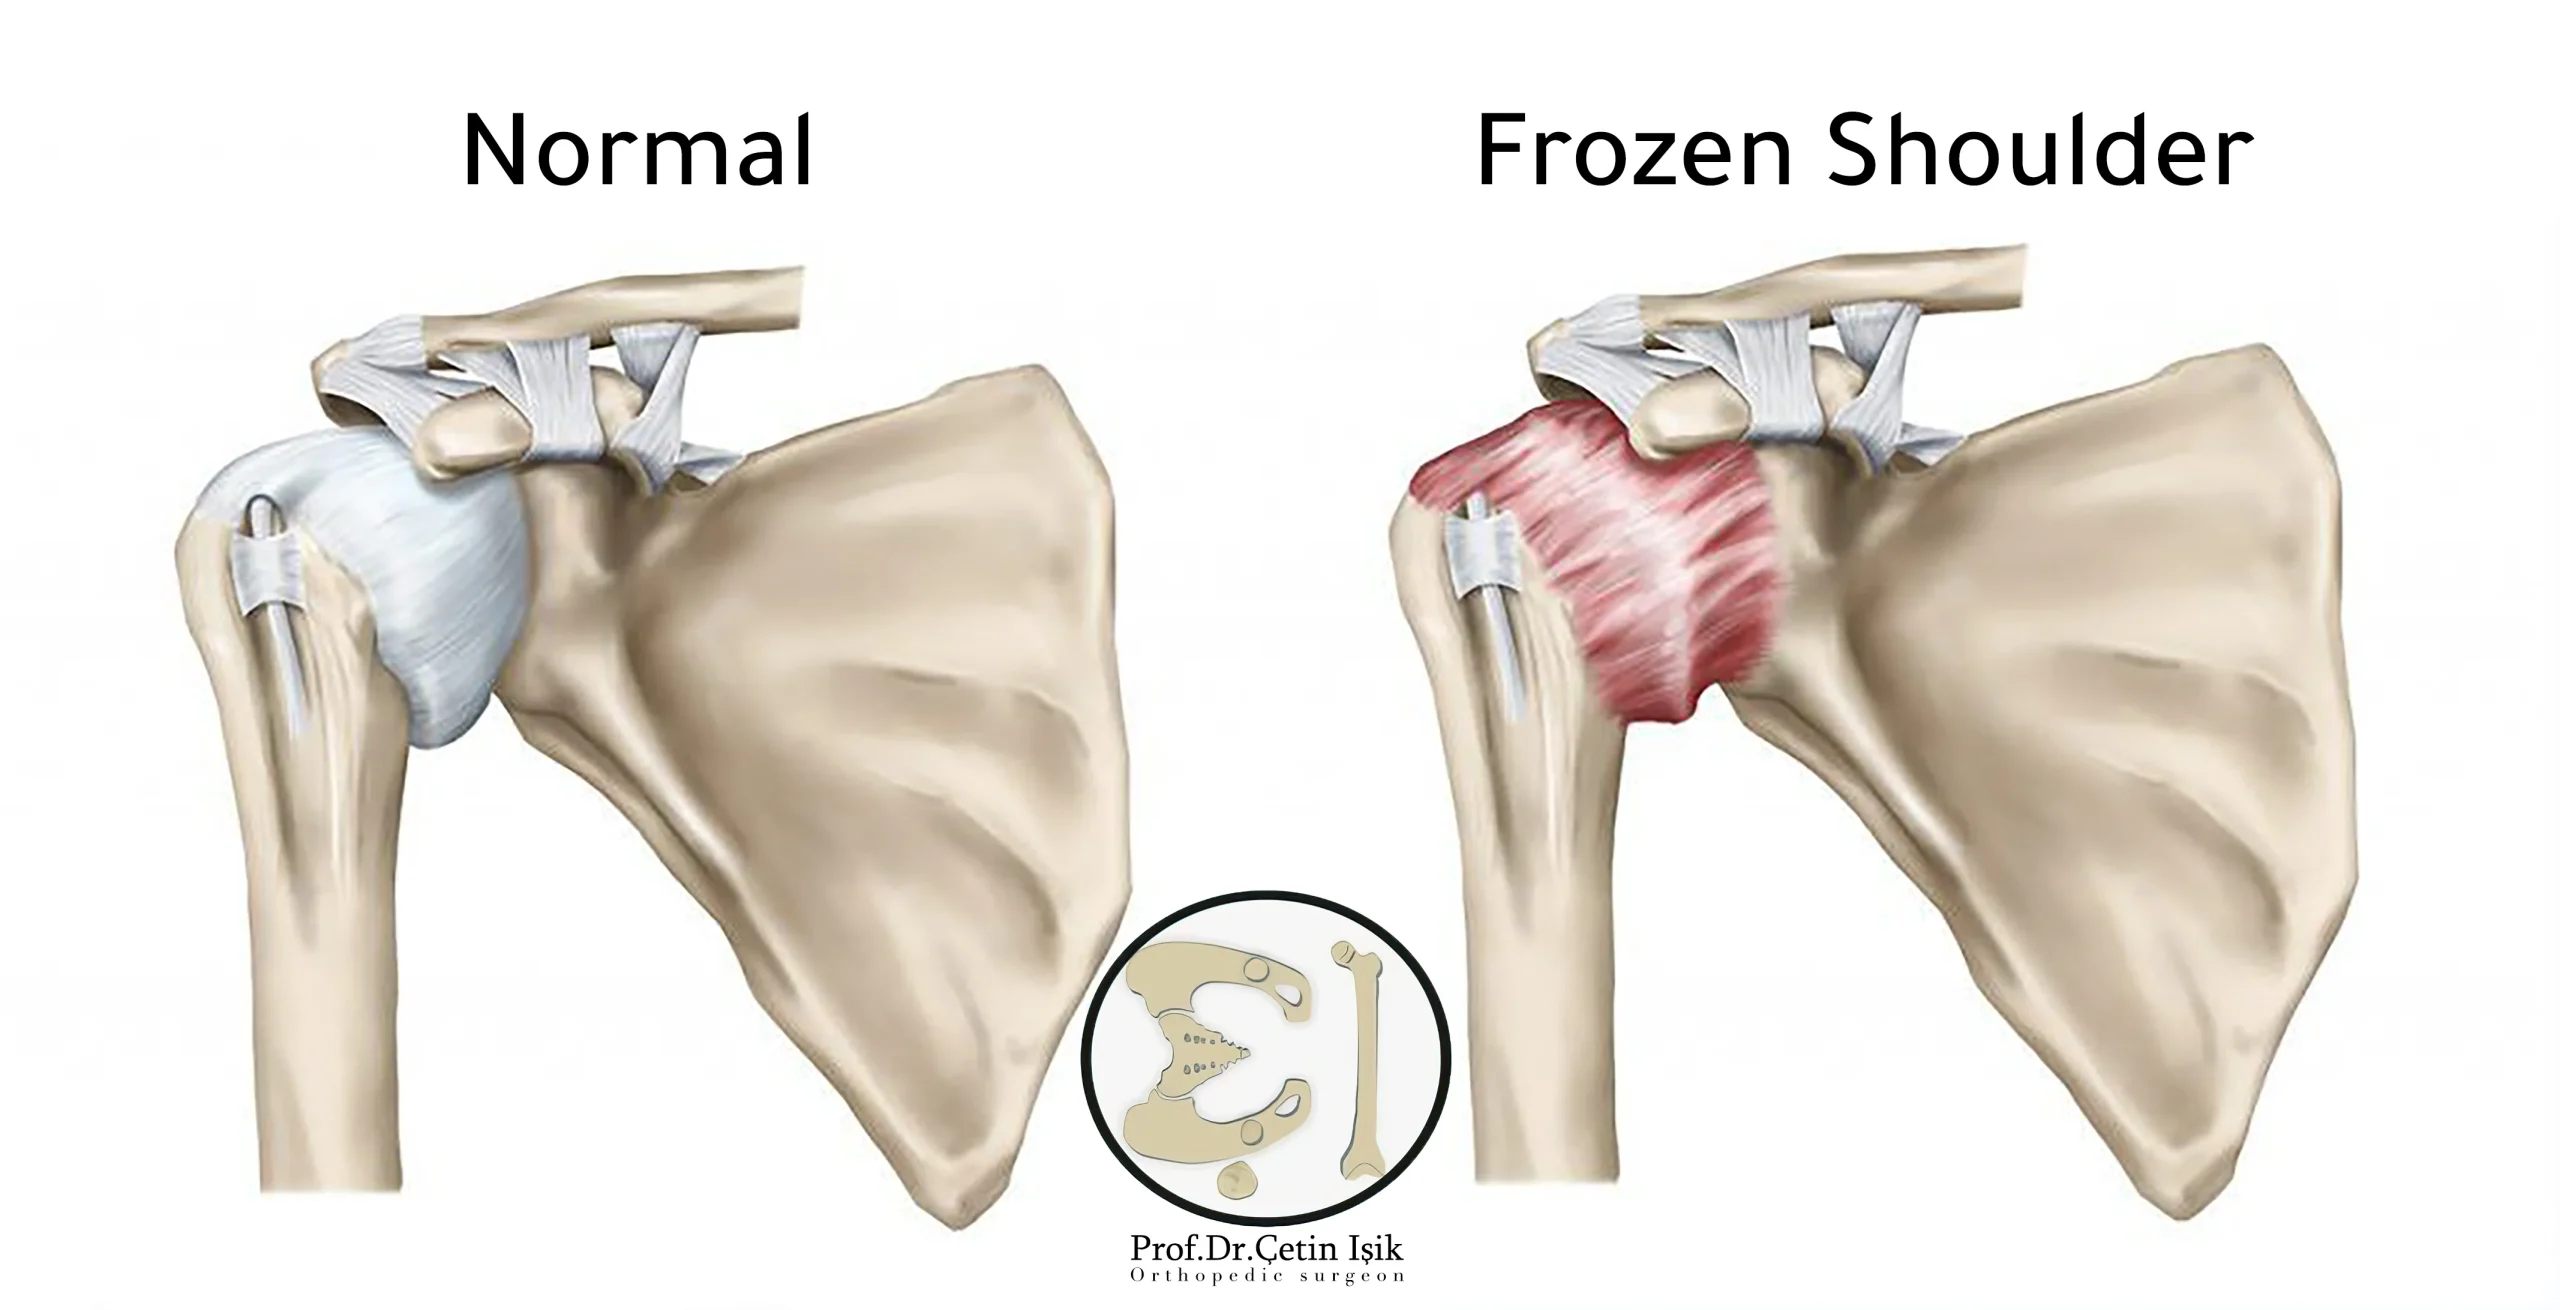 The difference between a normal shoulder and a frozen shoulder, we note the formation of scar tissue in the shoulder joint in the case of frozen shoulder